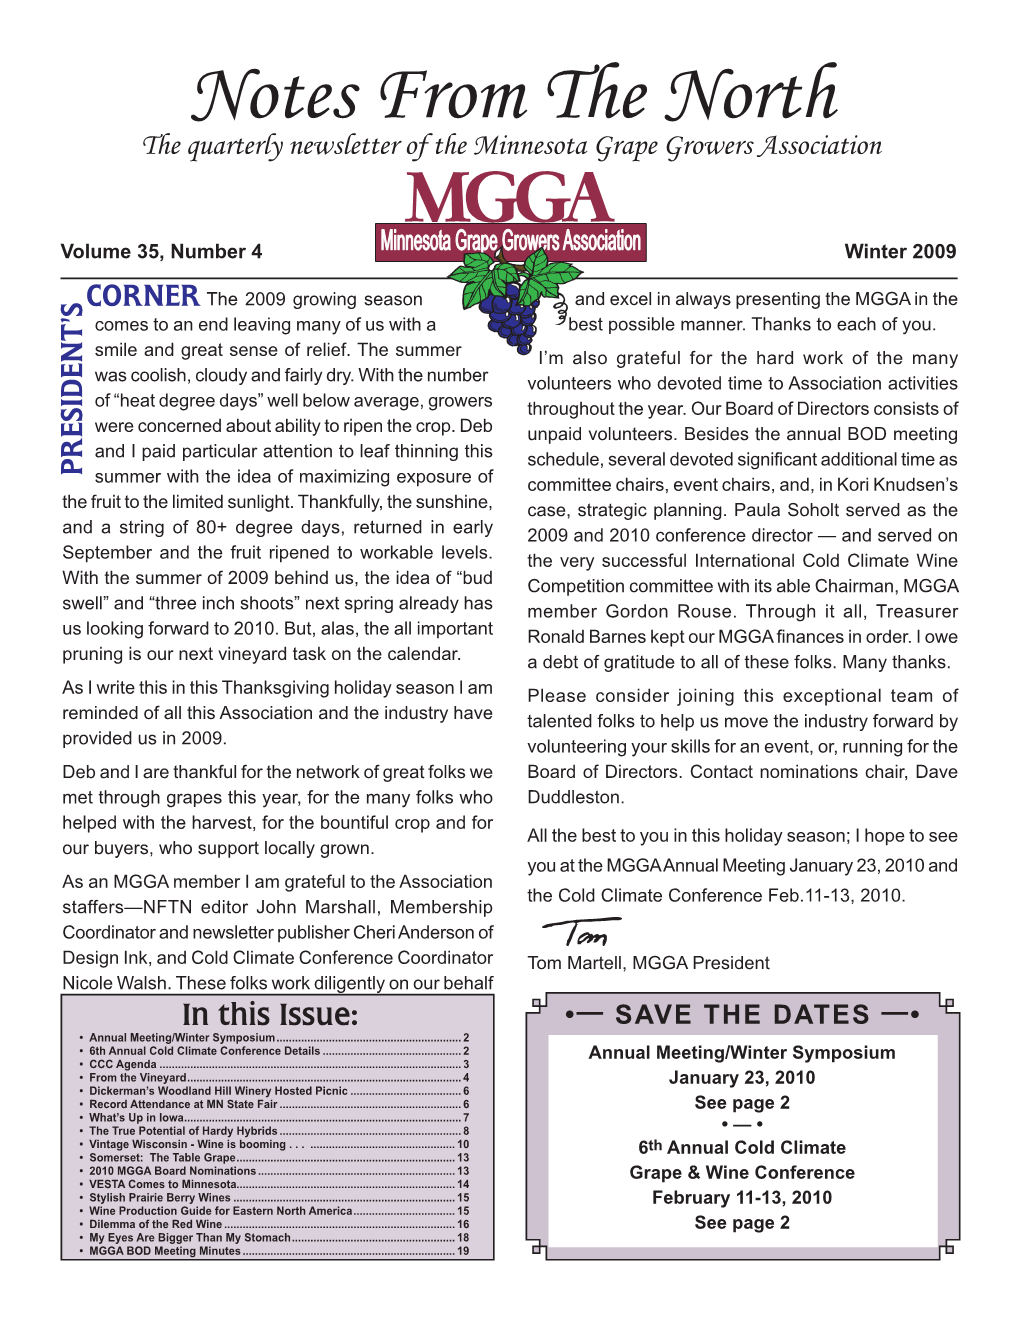 Notes from the North the Quarterly Newsletter of the Minnesota Grape Growers Association P R E S